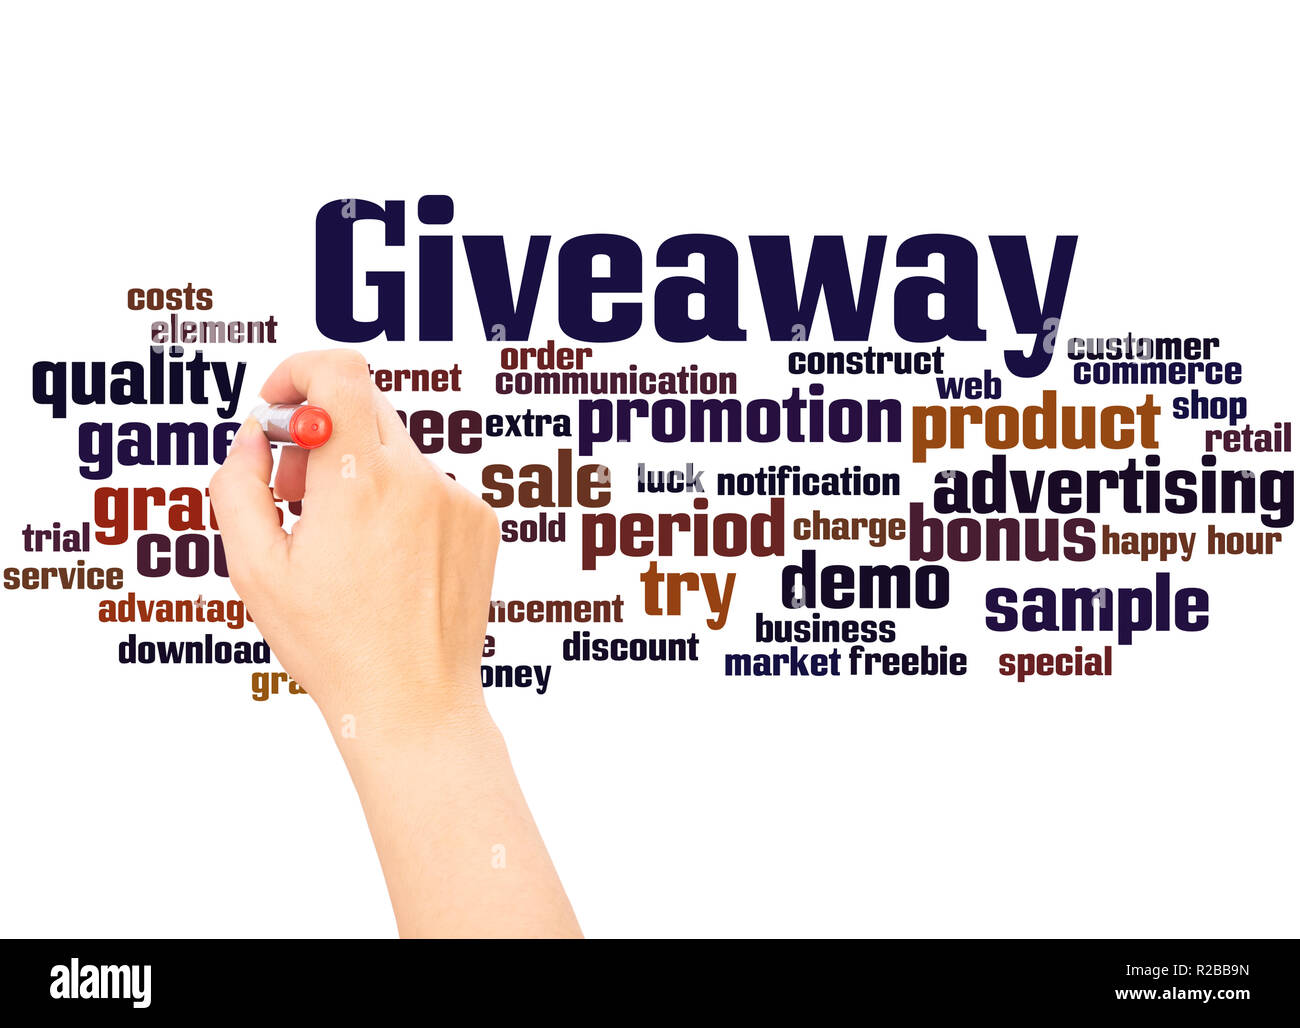 Giveaway word cloud hand writing concept on white background. Stock Photo